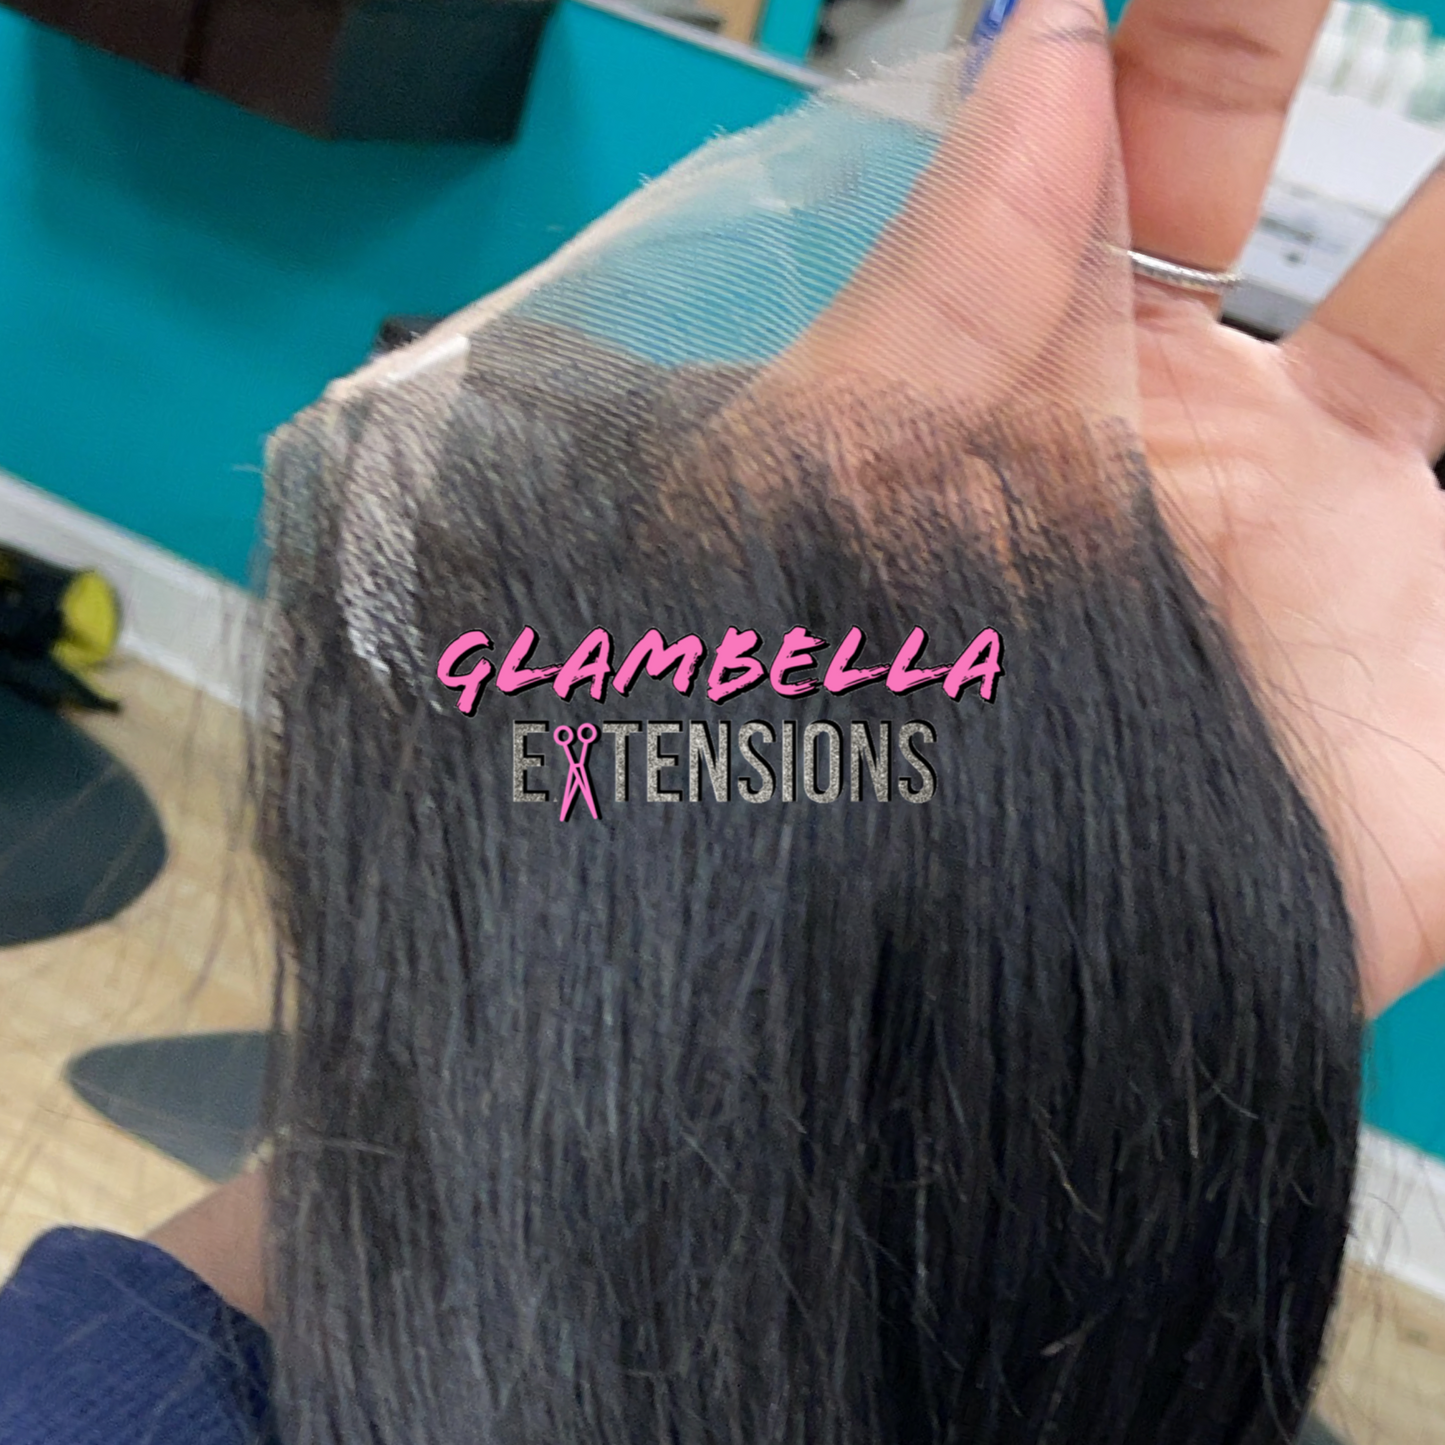 Japanese Mink 4X4 HD Lace Closures